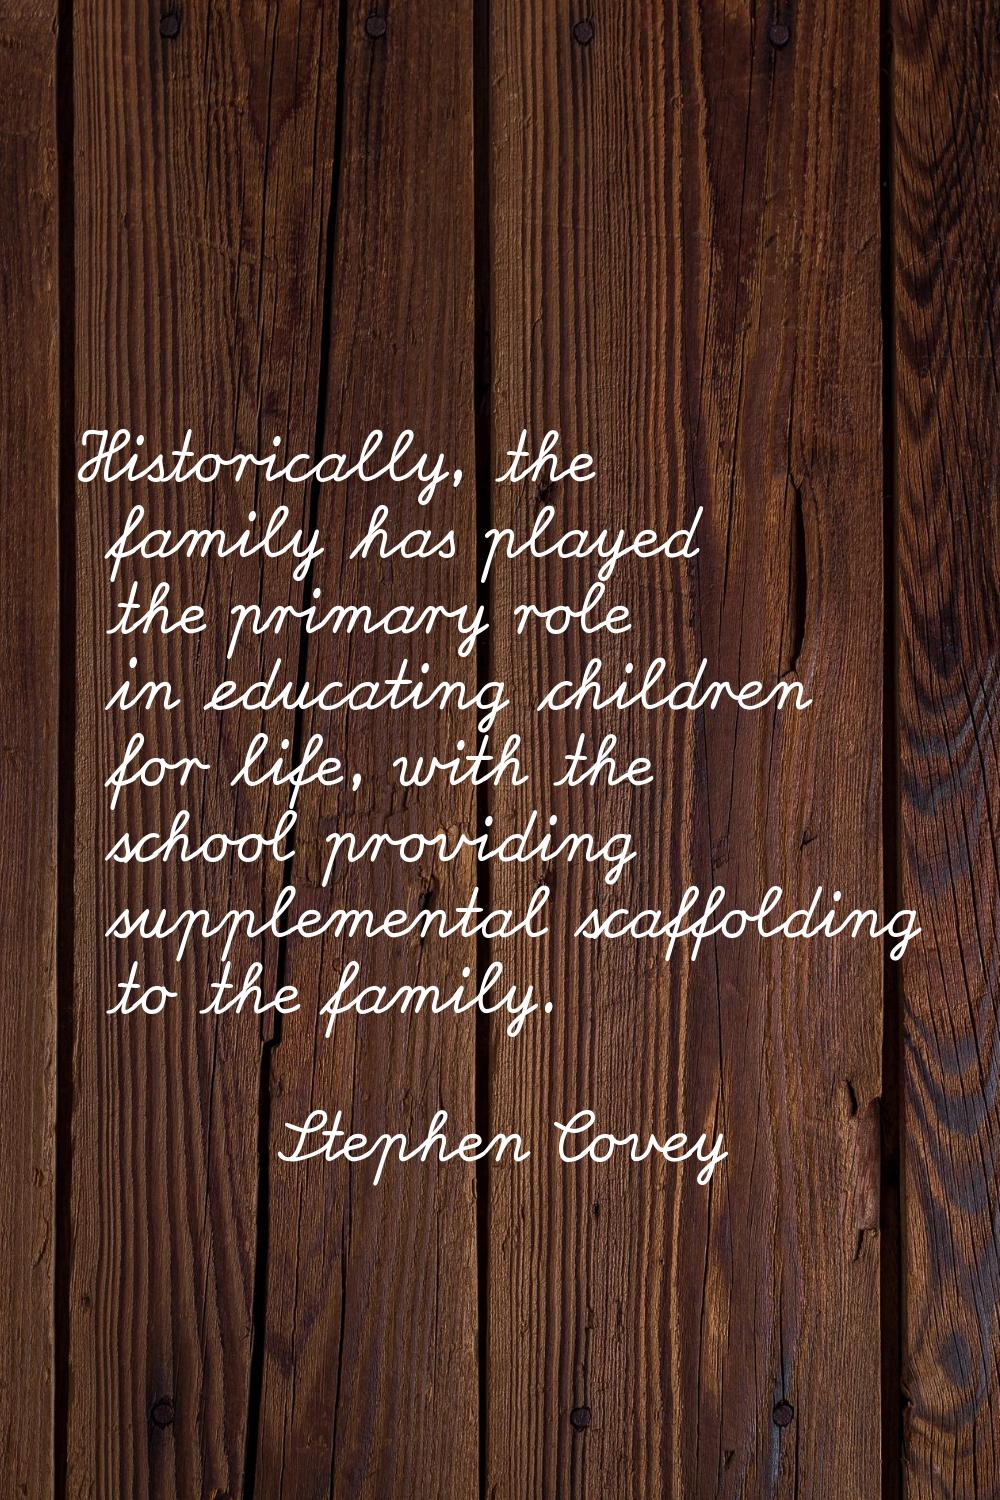 Historically, the family has played the primary role in educating children for life, with the schoo